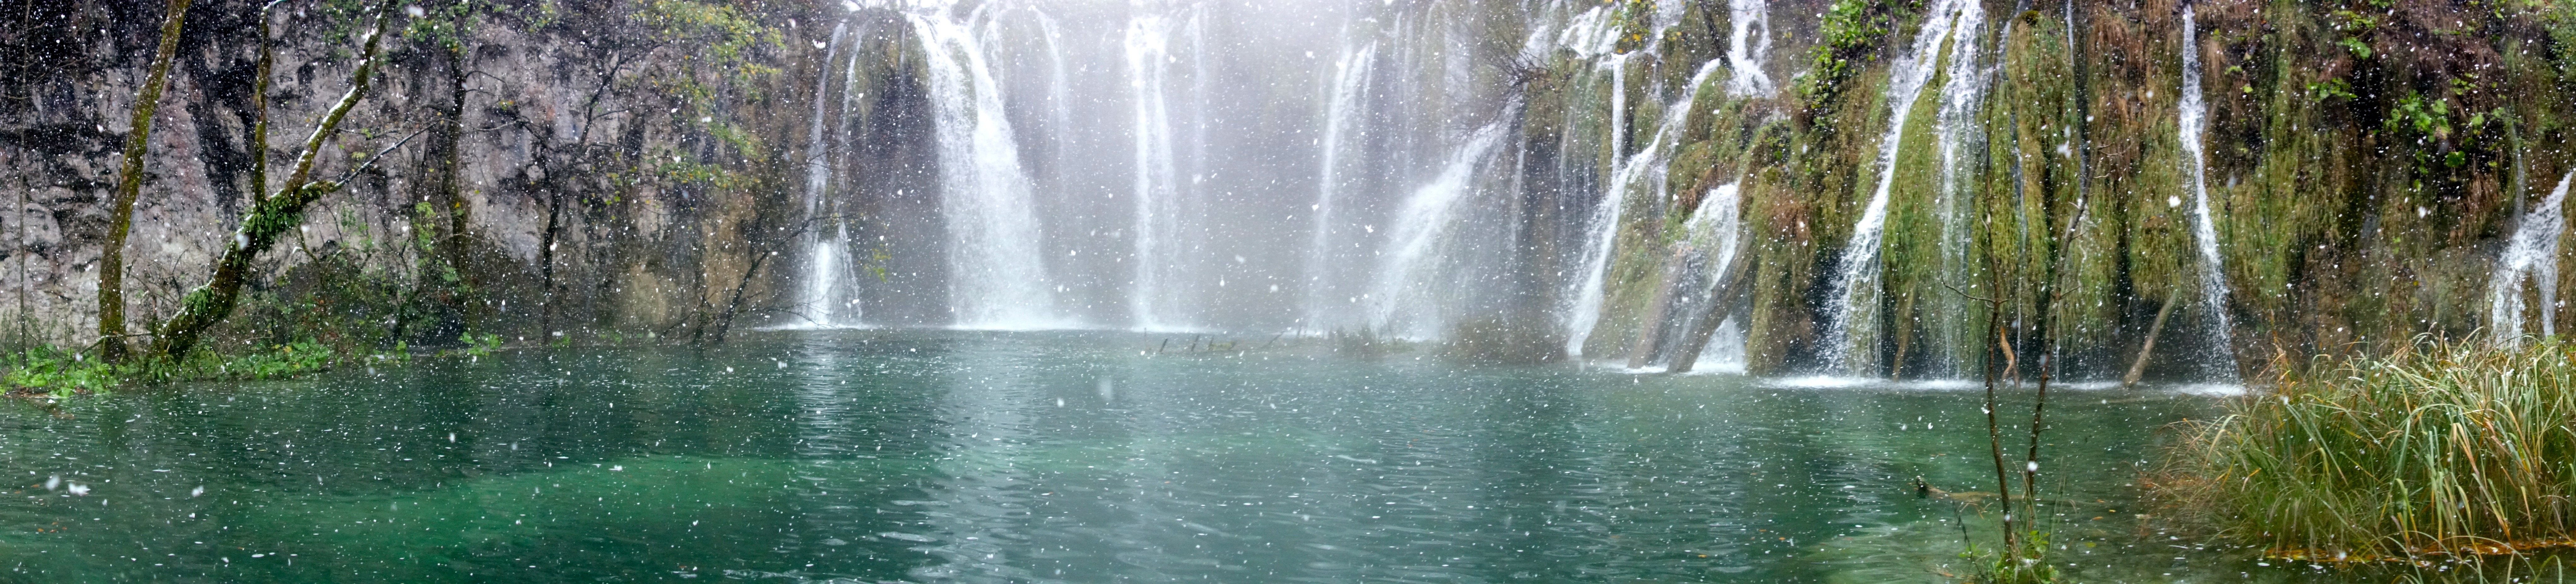 Frozen and Wandering Plitvice Lake